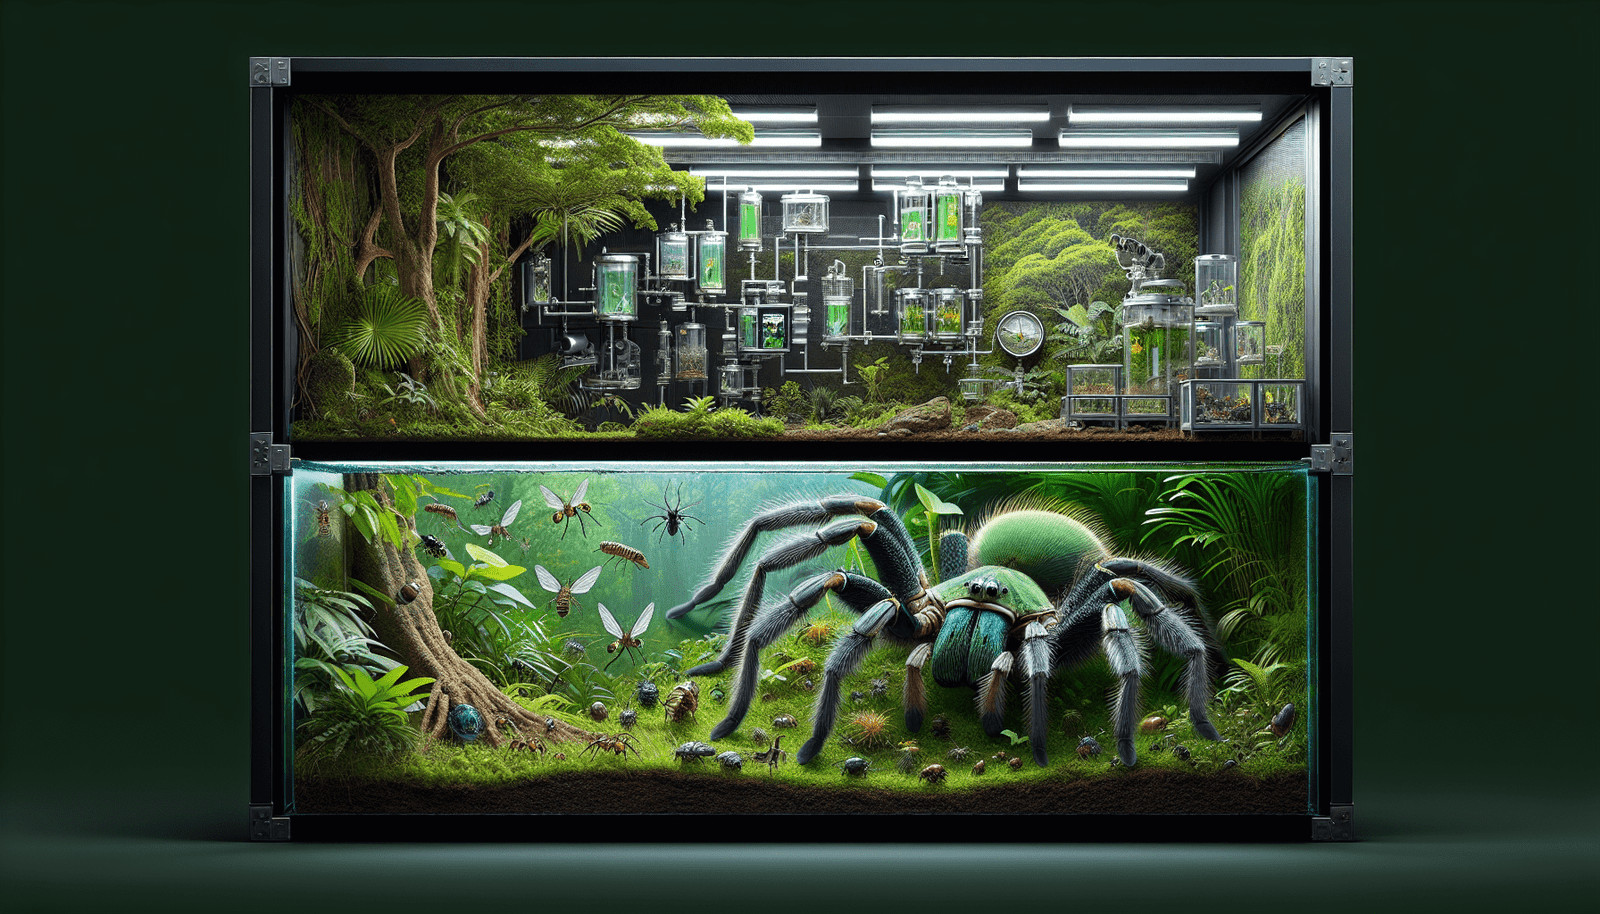 How Do You Replicate The Natural Environment Of The Enigmatic Green Huntsman Spider In Captivity?